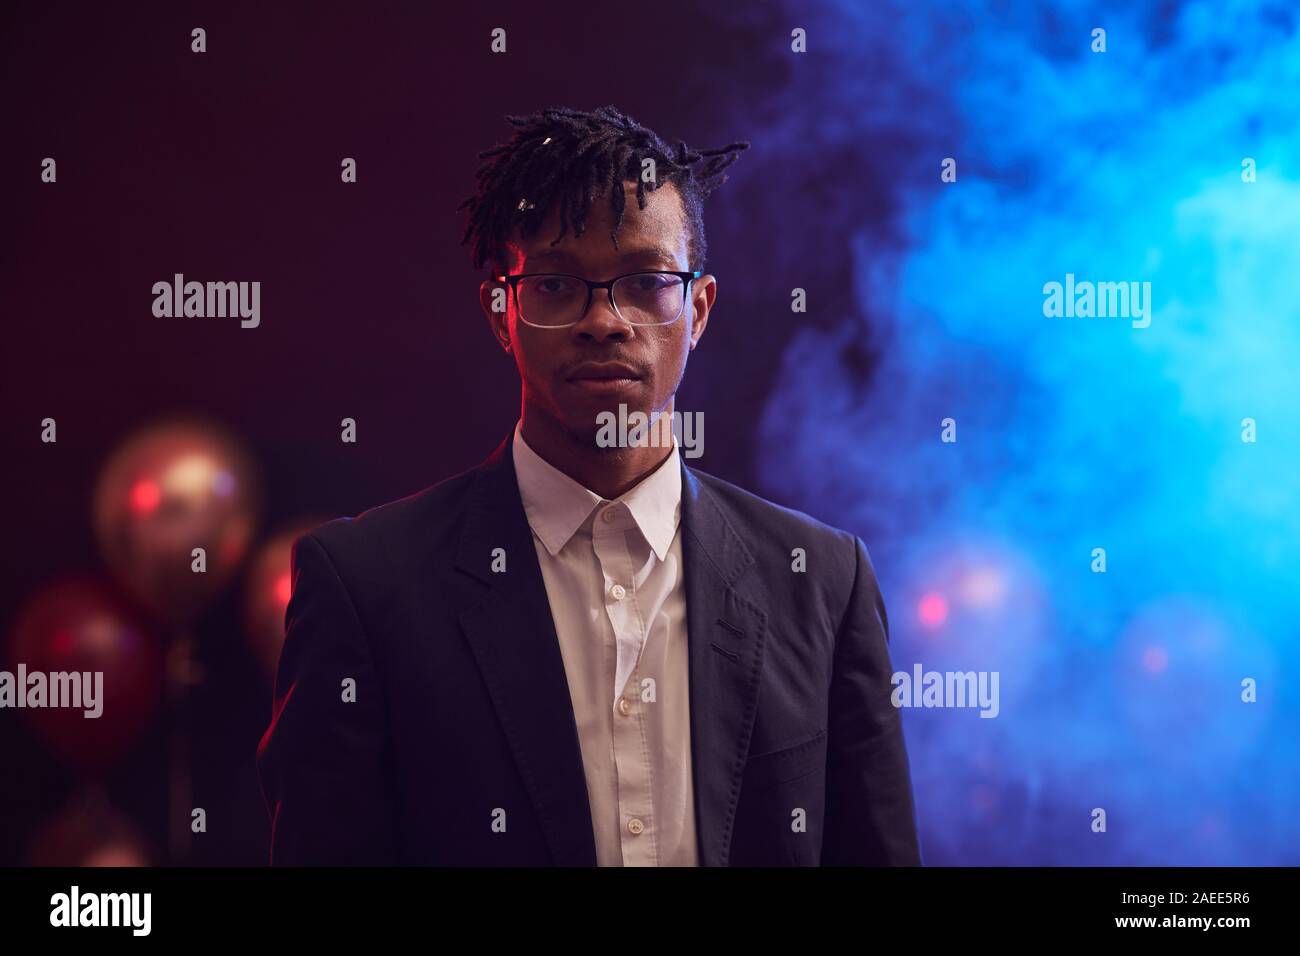 Waist up portrait of trendy African-American man looking at camera while standing in dimly lit room at nightclub, copy space Stock Photo